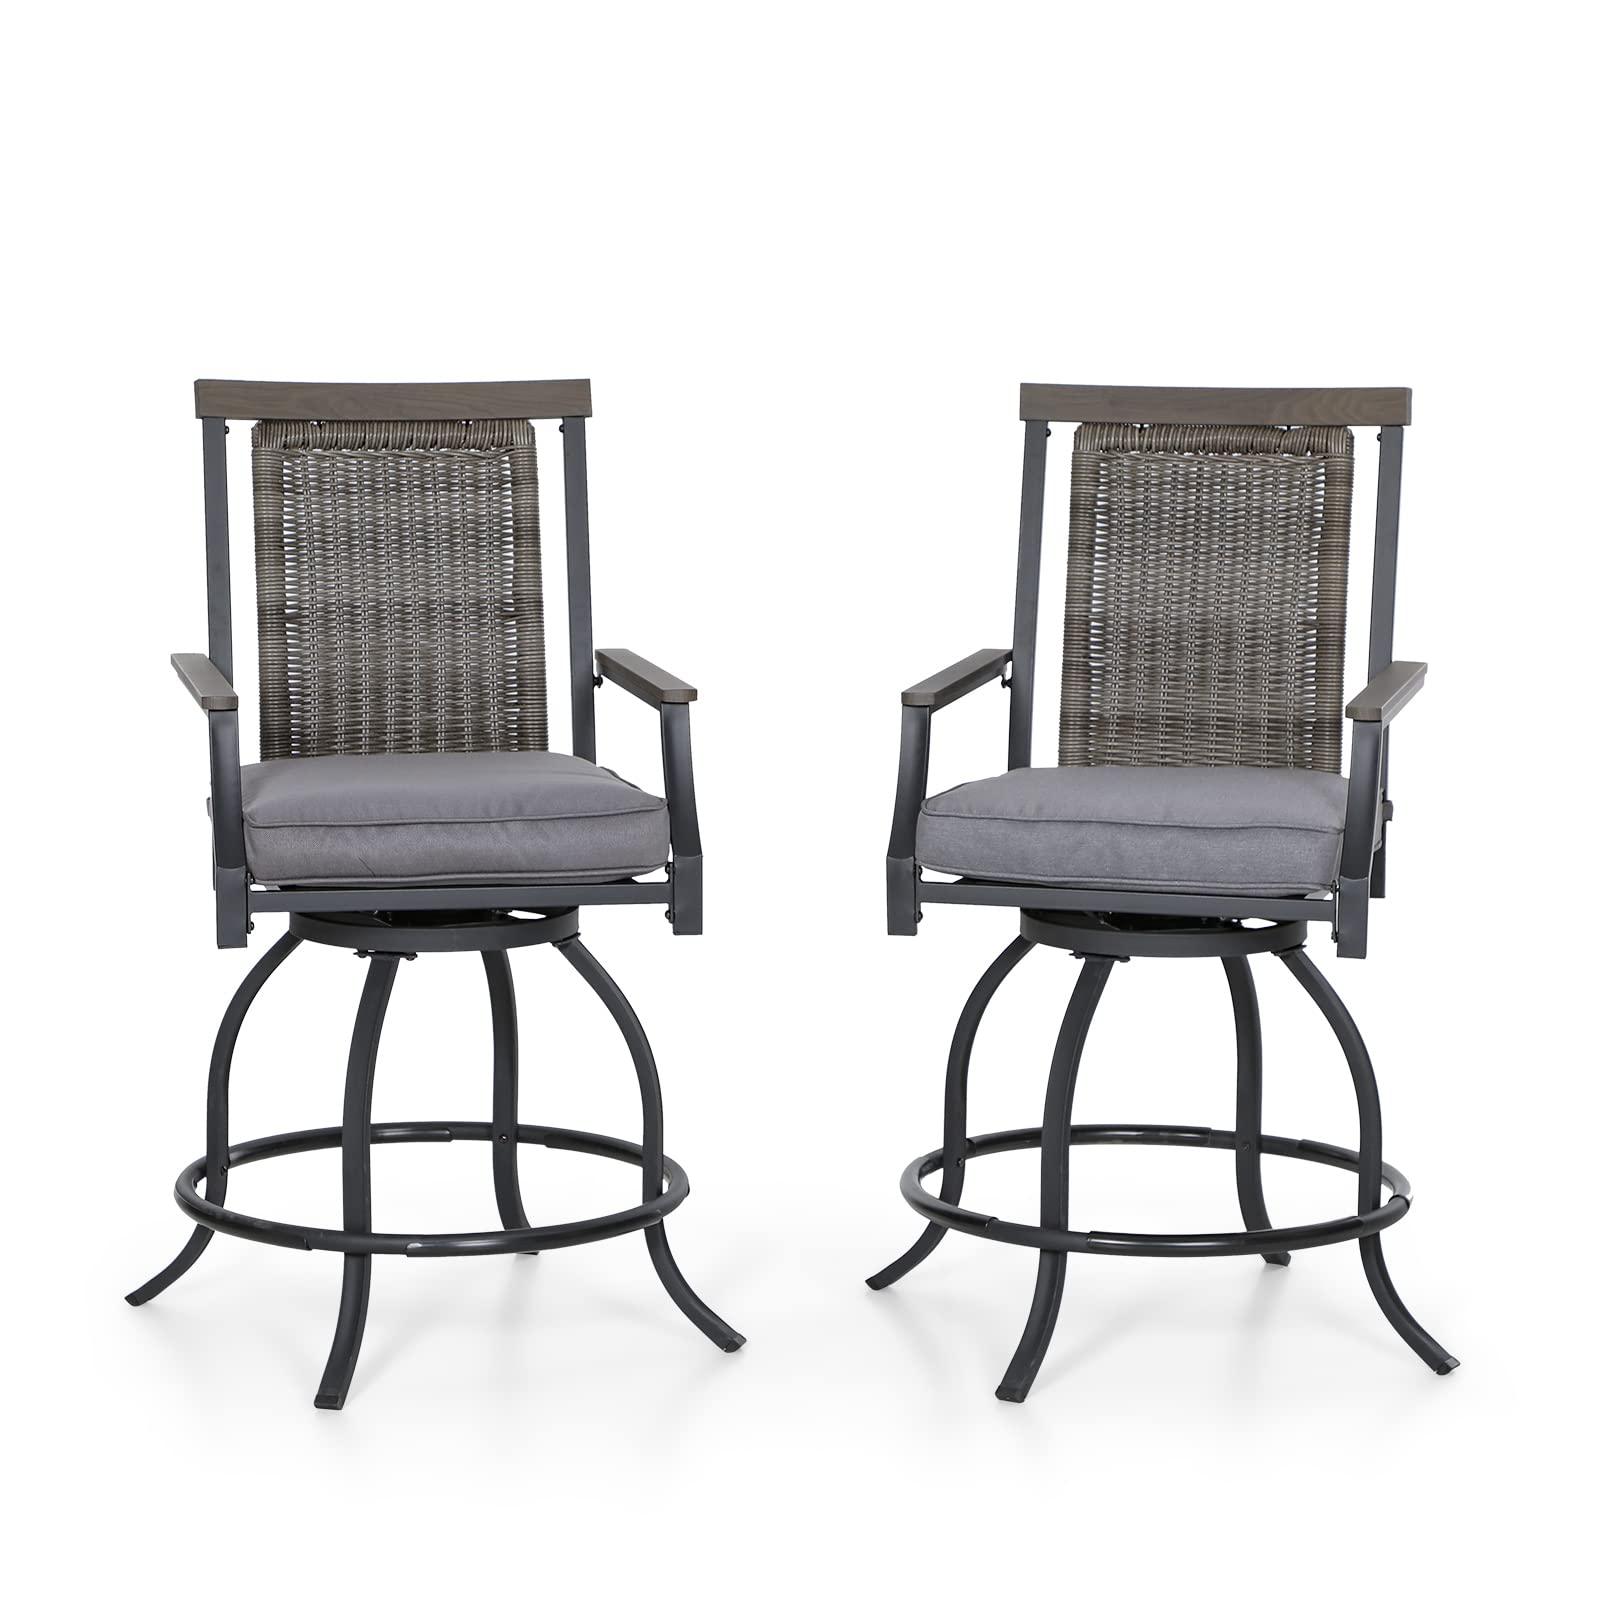 PHI VILLA Outdoor Swivel Bar Stools (24" Seat Height) with Rattan Backrest and Wood-Like Armrest Set of 2, Counter Height Patio Chair with 3.5" Padded Grey Cushion,All Weather for Garden,Yard,Lawn - CookCave